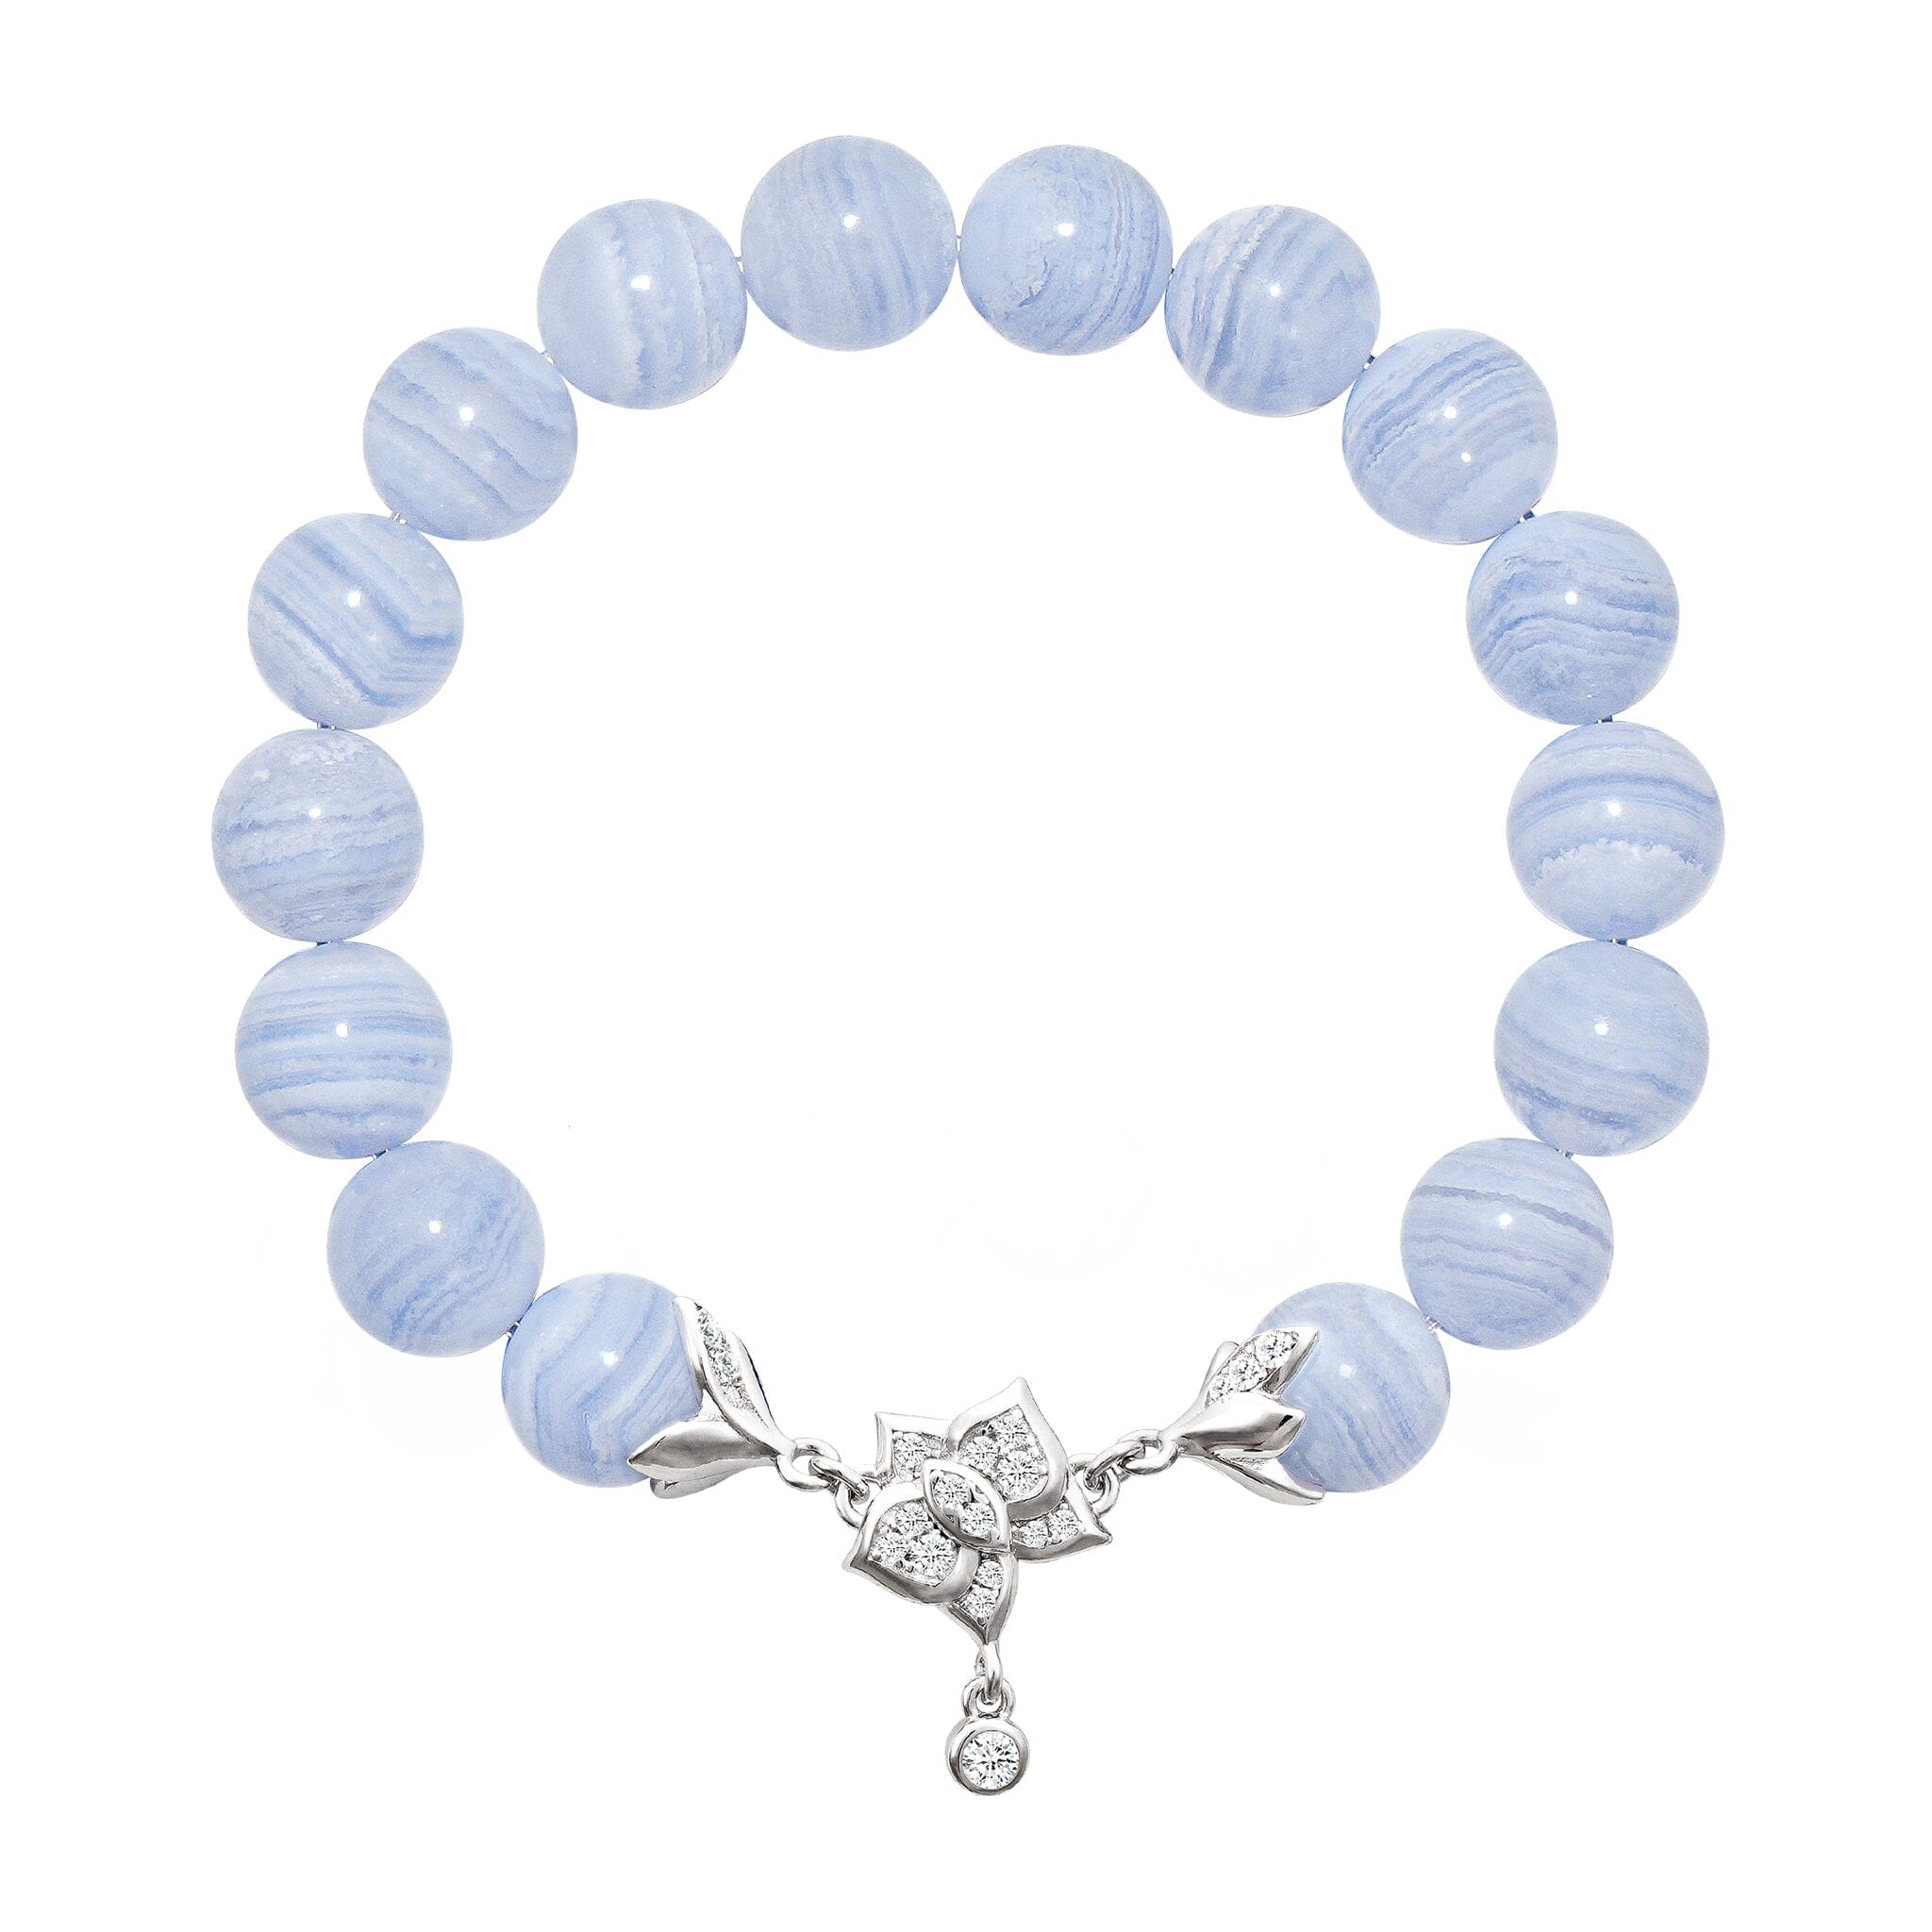 Women's Moth Orchid Charm Beaded Bracelet with Blue Lace Agate Bracelets WAA FASHION GROUP 